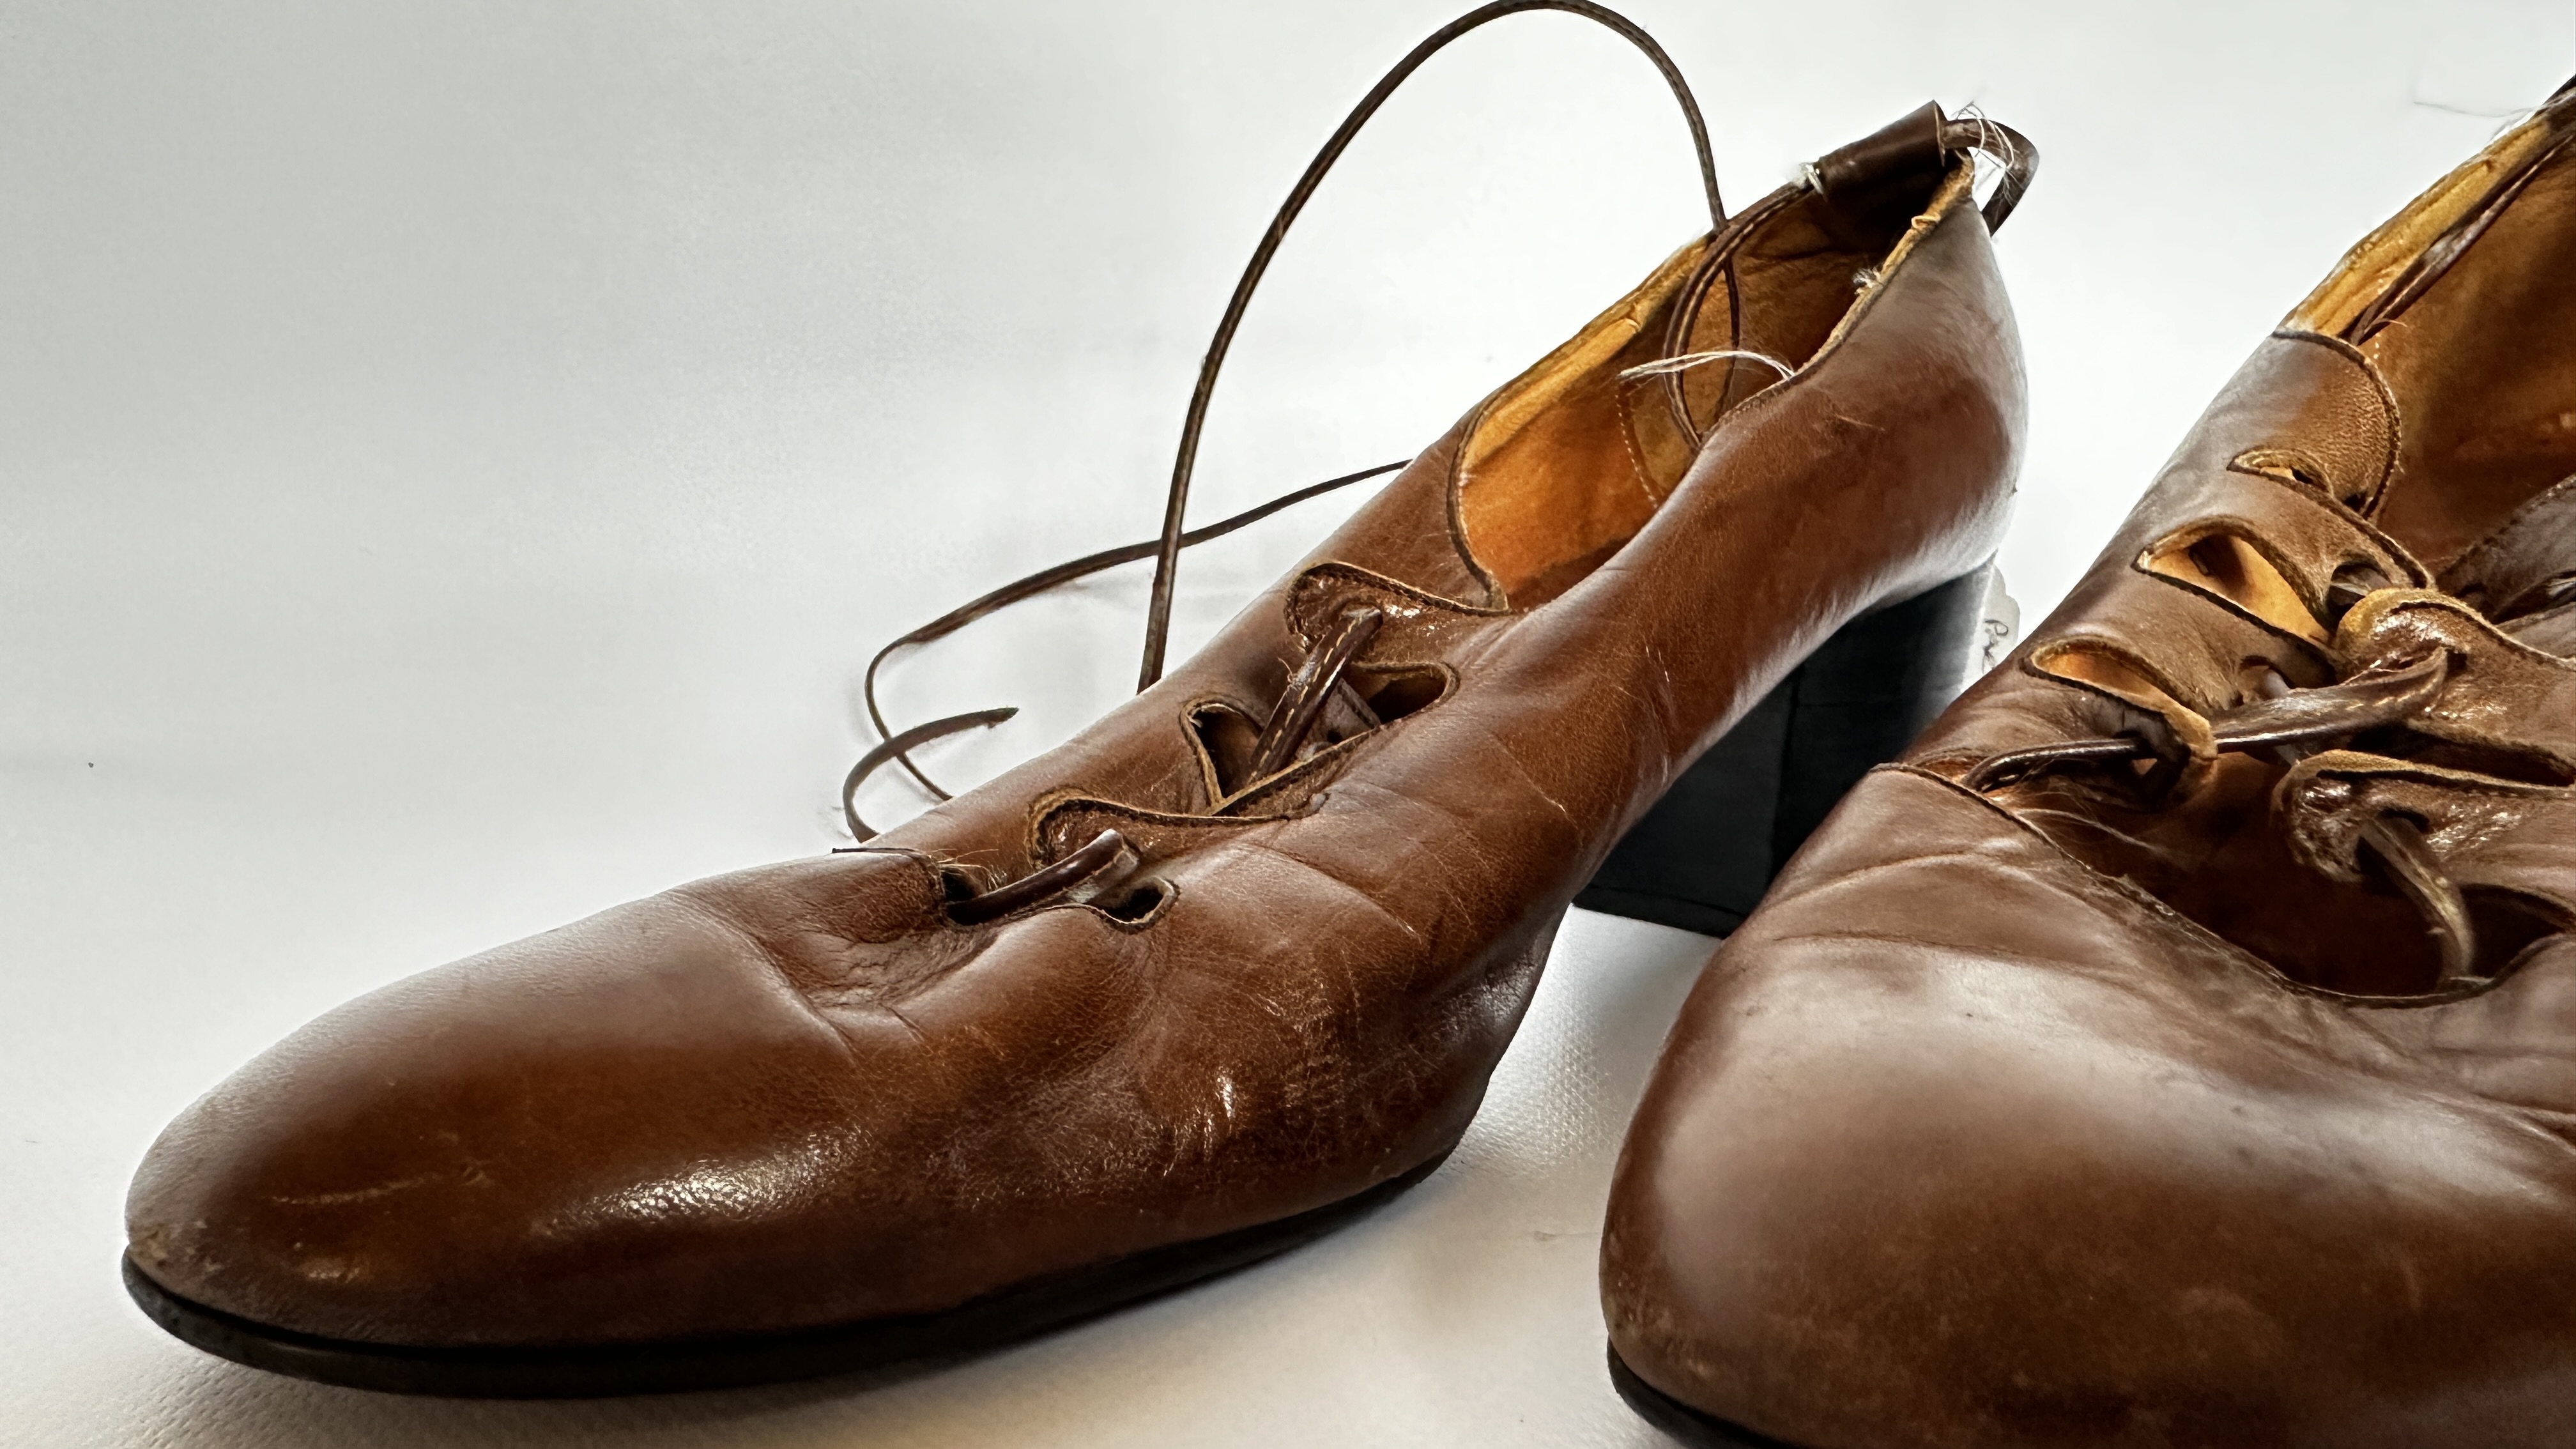 1 PAIR OF LADY'S SHOES - 'BIBA' TAN LEATHER WITH LONG LACES - A/F CONDITION, SOLD AS SEEN. - Image 6 of 14